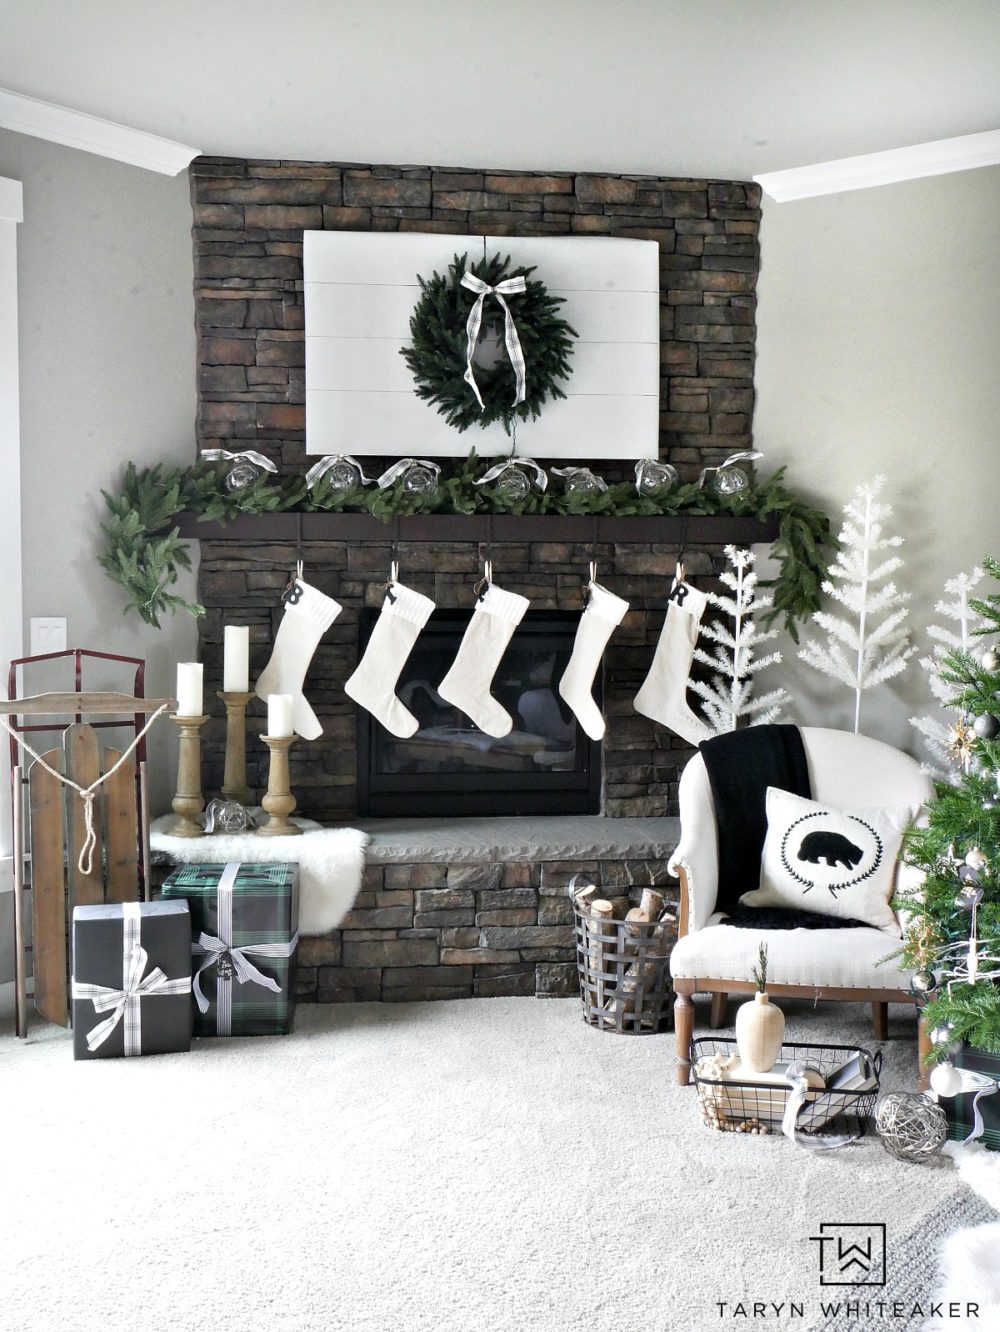 Recreate this Neutral Christmas Mantel using lush greenery, winter white and pops of black and plaid. This look is fresh, clean and festive. 